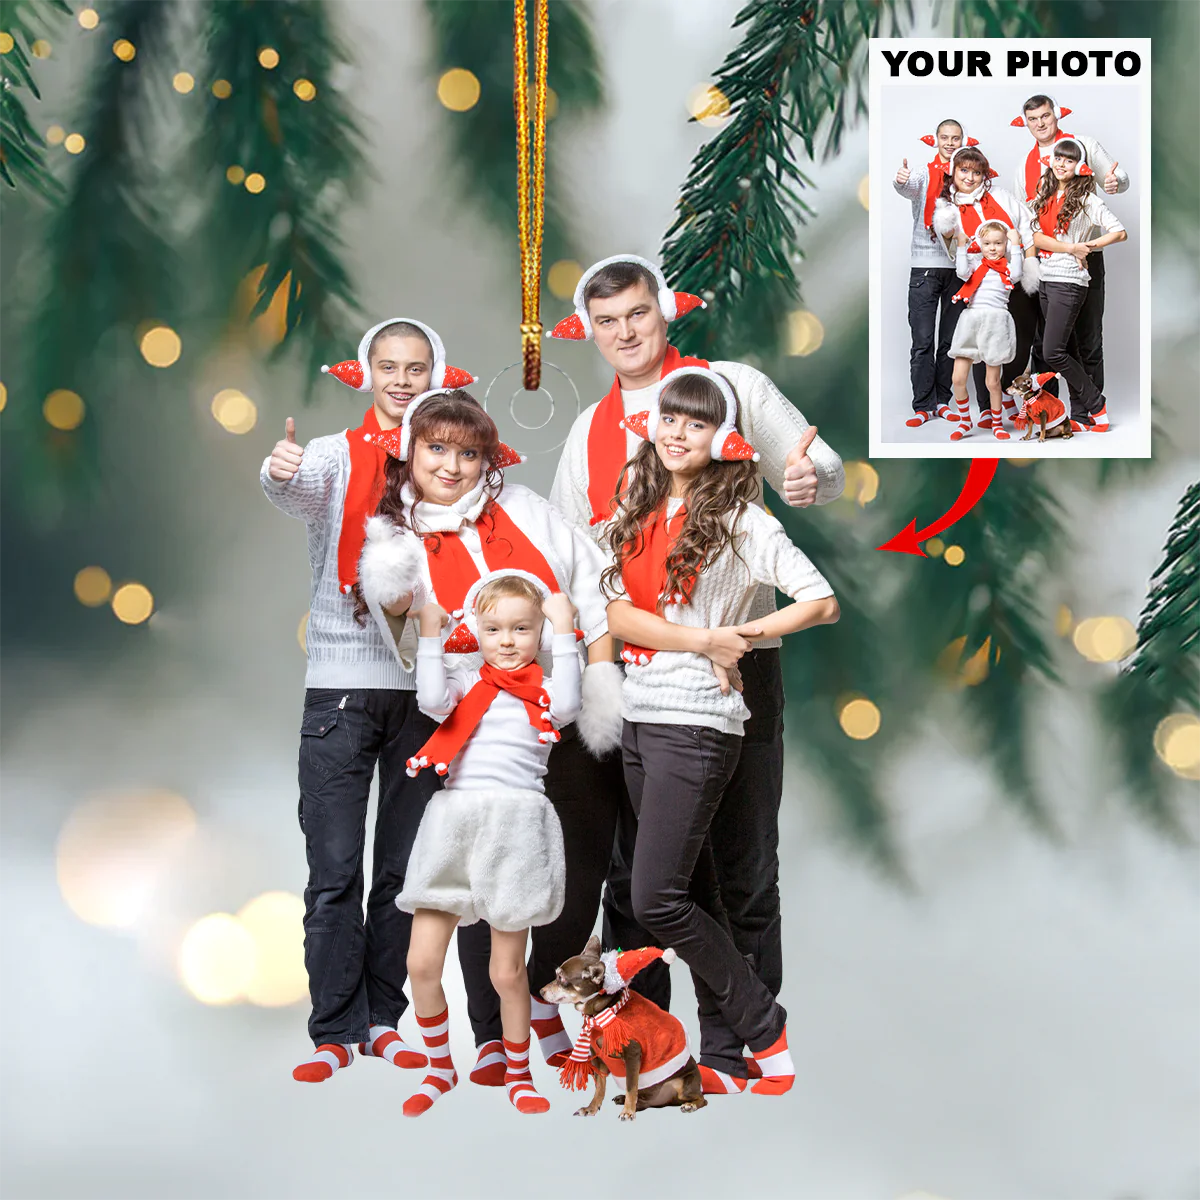 Customized Your Photo Ornament - Personalized Photo Mica Ornament - Christmas Gift For Family Members